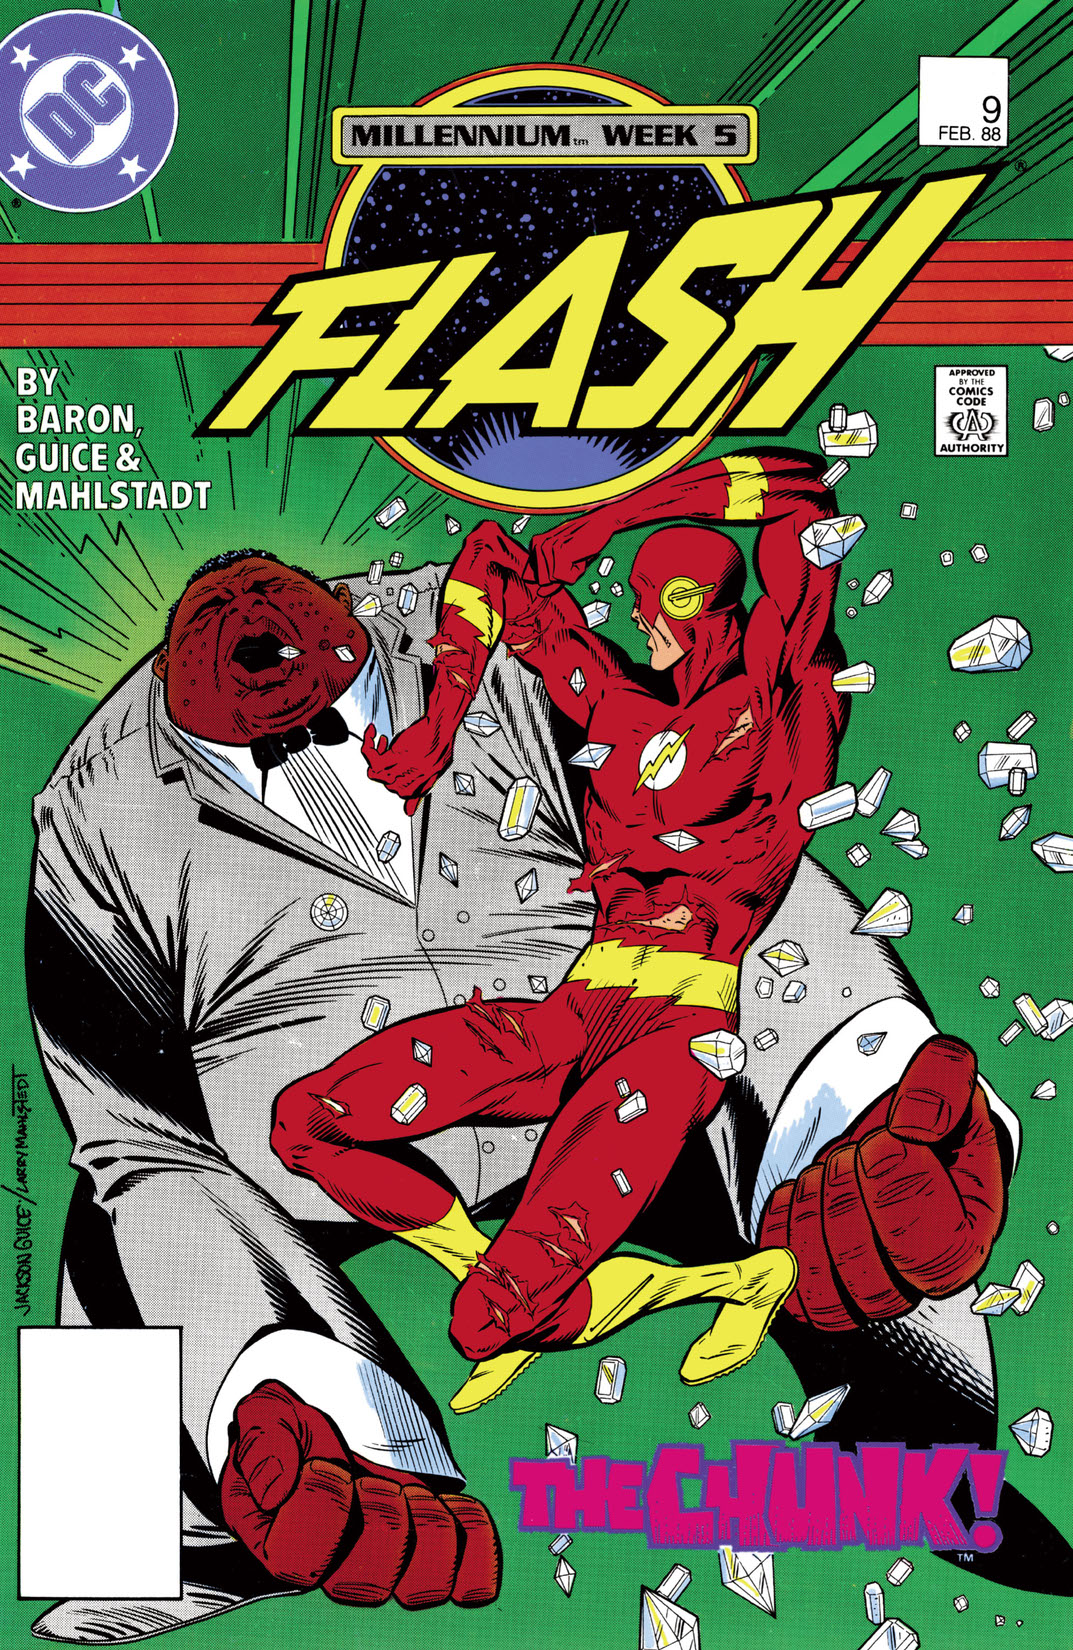 The Flash (1987-2008) #9 preview images